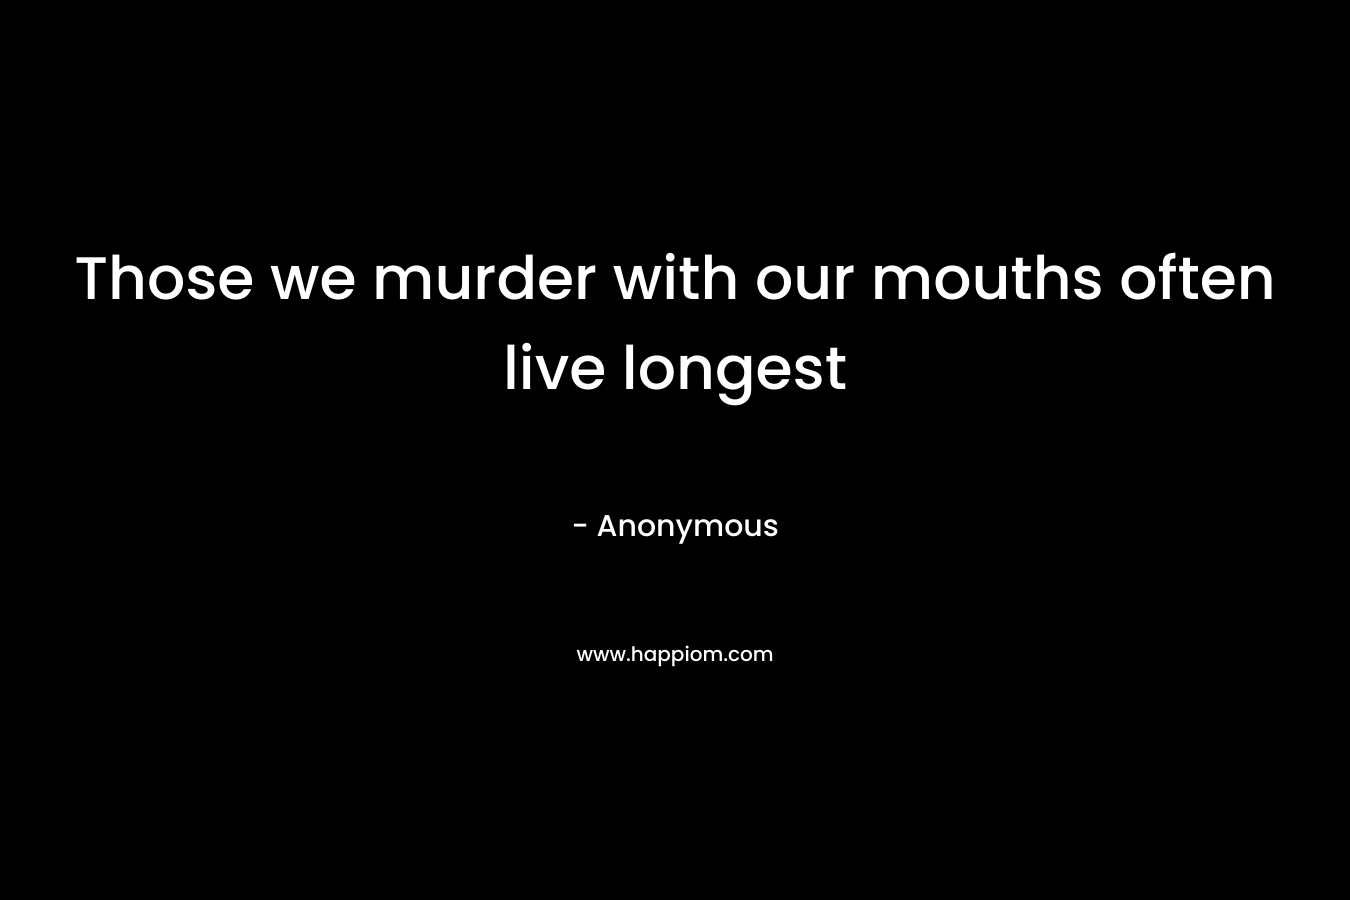 Those we murder with our mouths often live longest